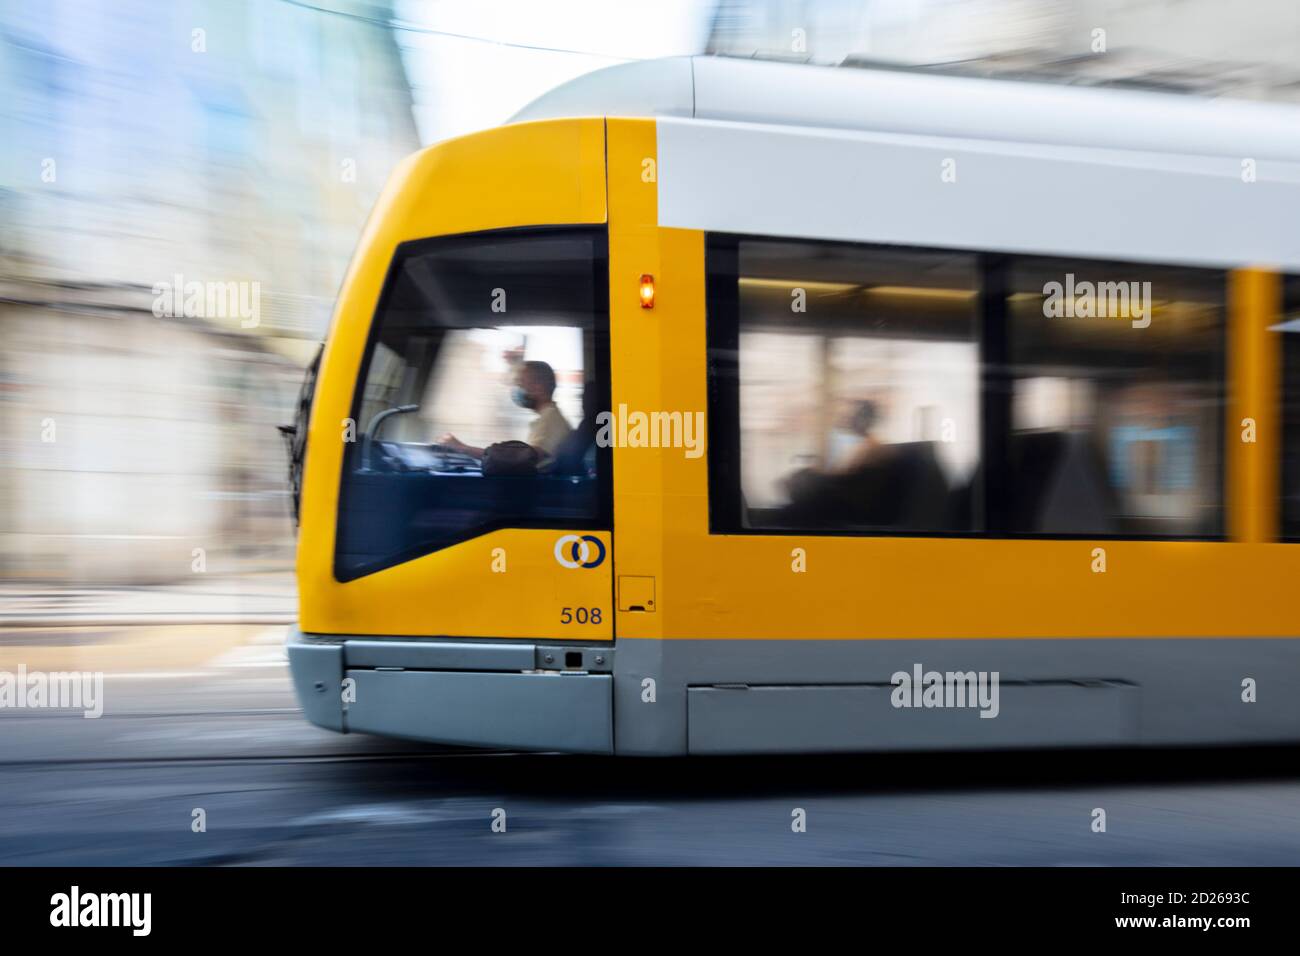 Portugal, Lisbon, a Siemens Soreframe light rail vehicle or tram in the city centre Stock Photo